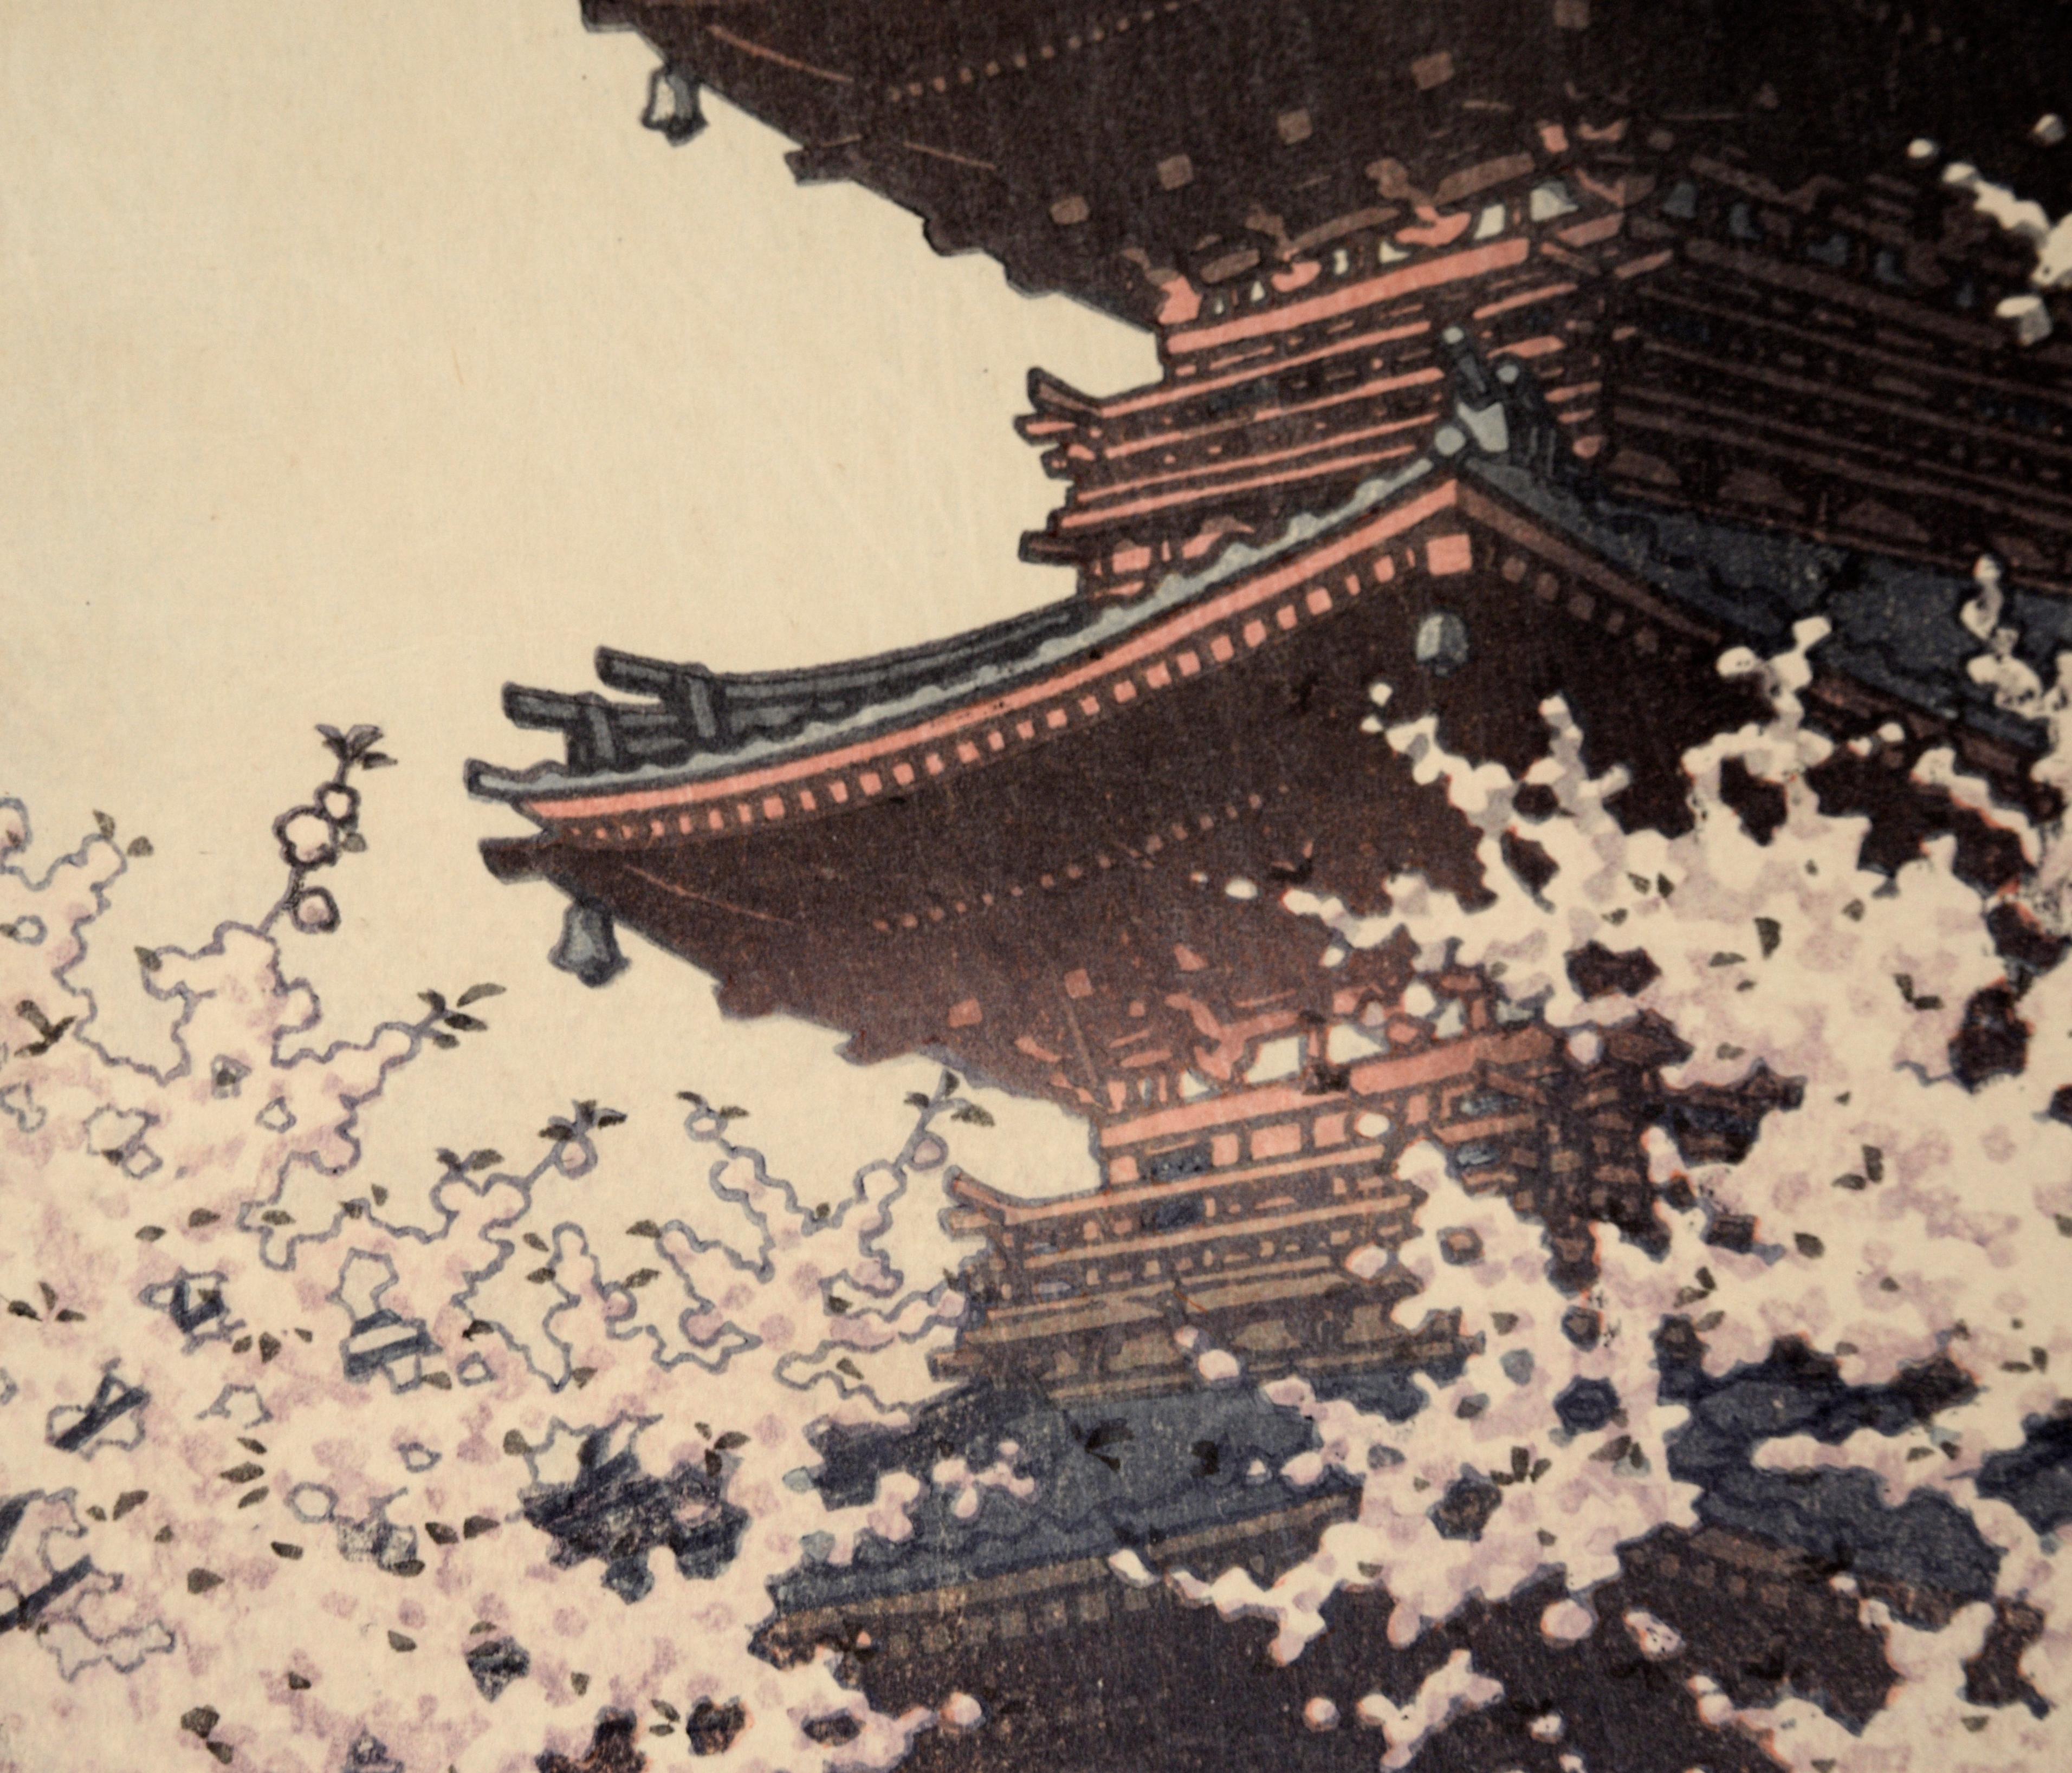 Spring Evening, Ueno Toshogu Shrine - Woodblock Print with First Edition Seal
Woodblock print by Hasui Kawase (Japanese, 1883-1957). A crescent moon hangs above the five-story red pagoda of Kan’ei Temple on a clear spring evening in Ueno. Flowering